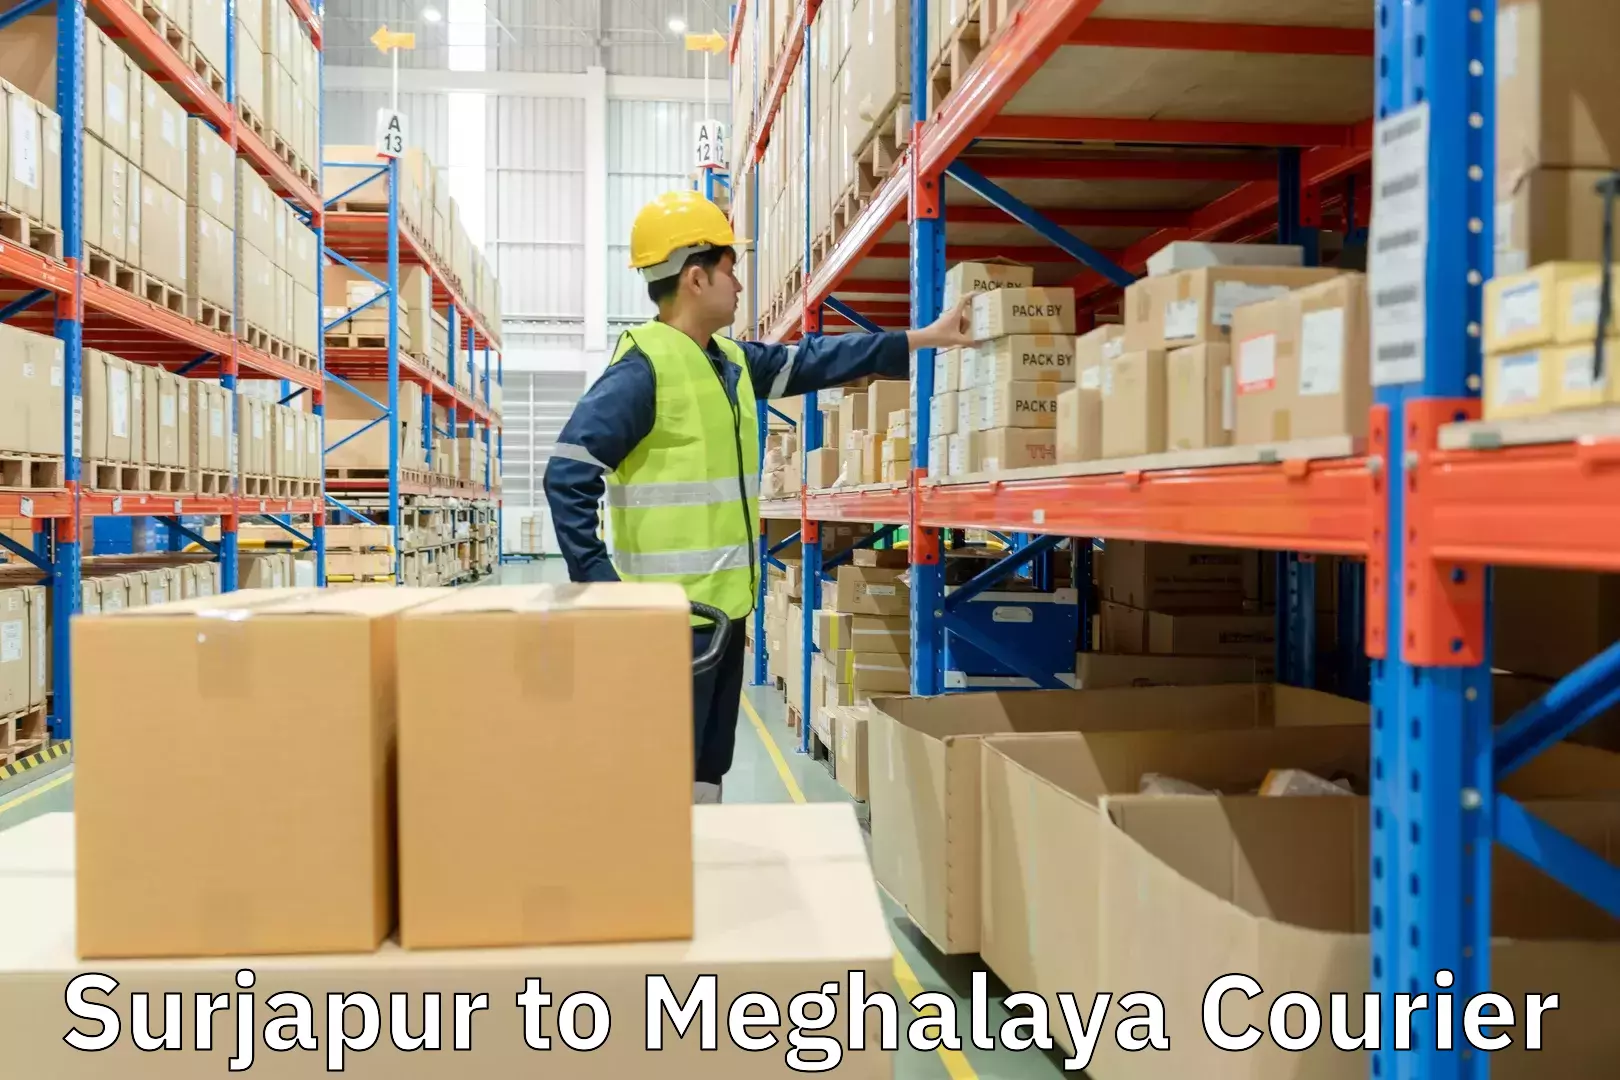 Global freight services Surjapur to Meghalaya